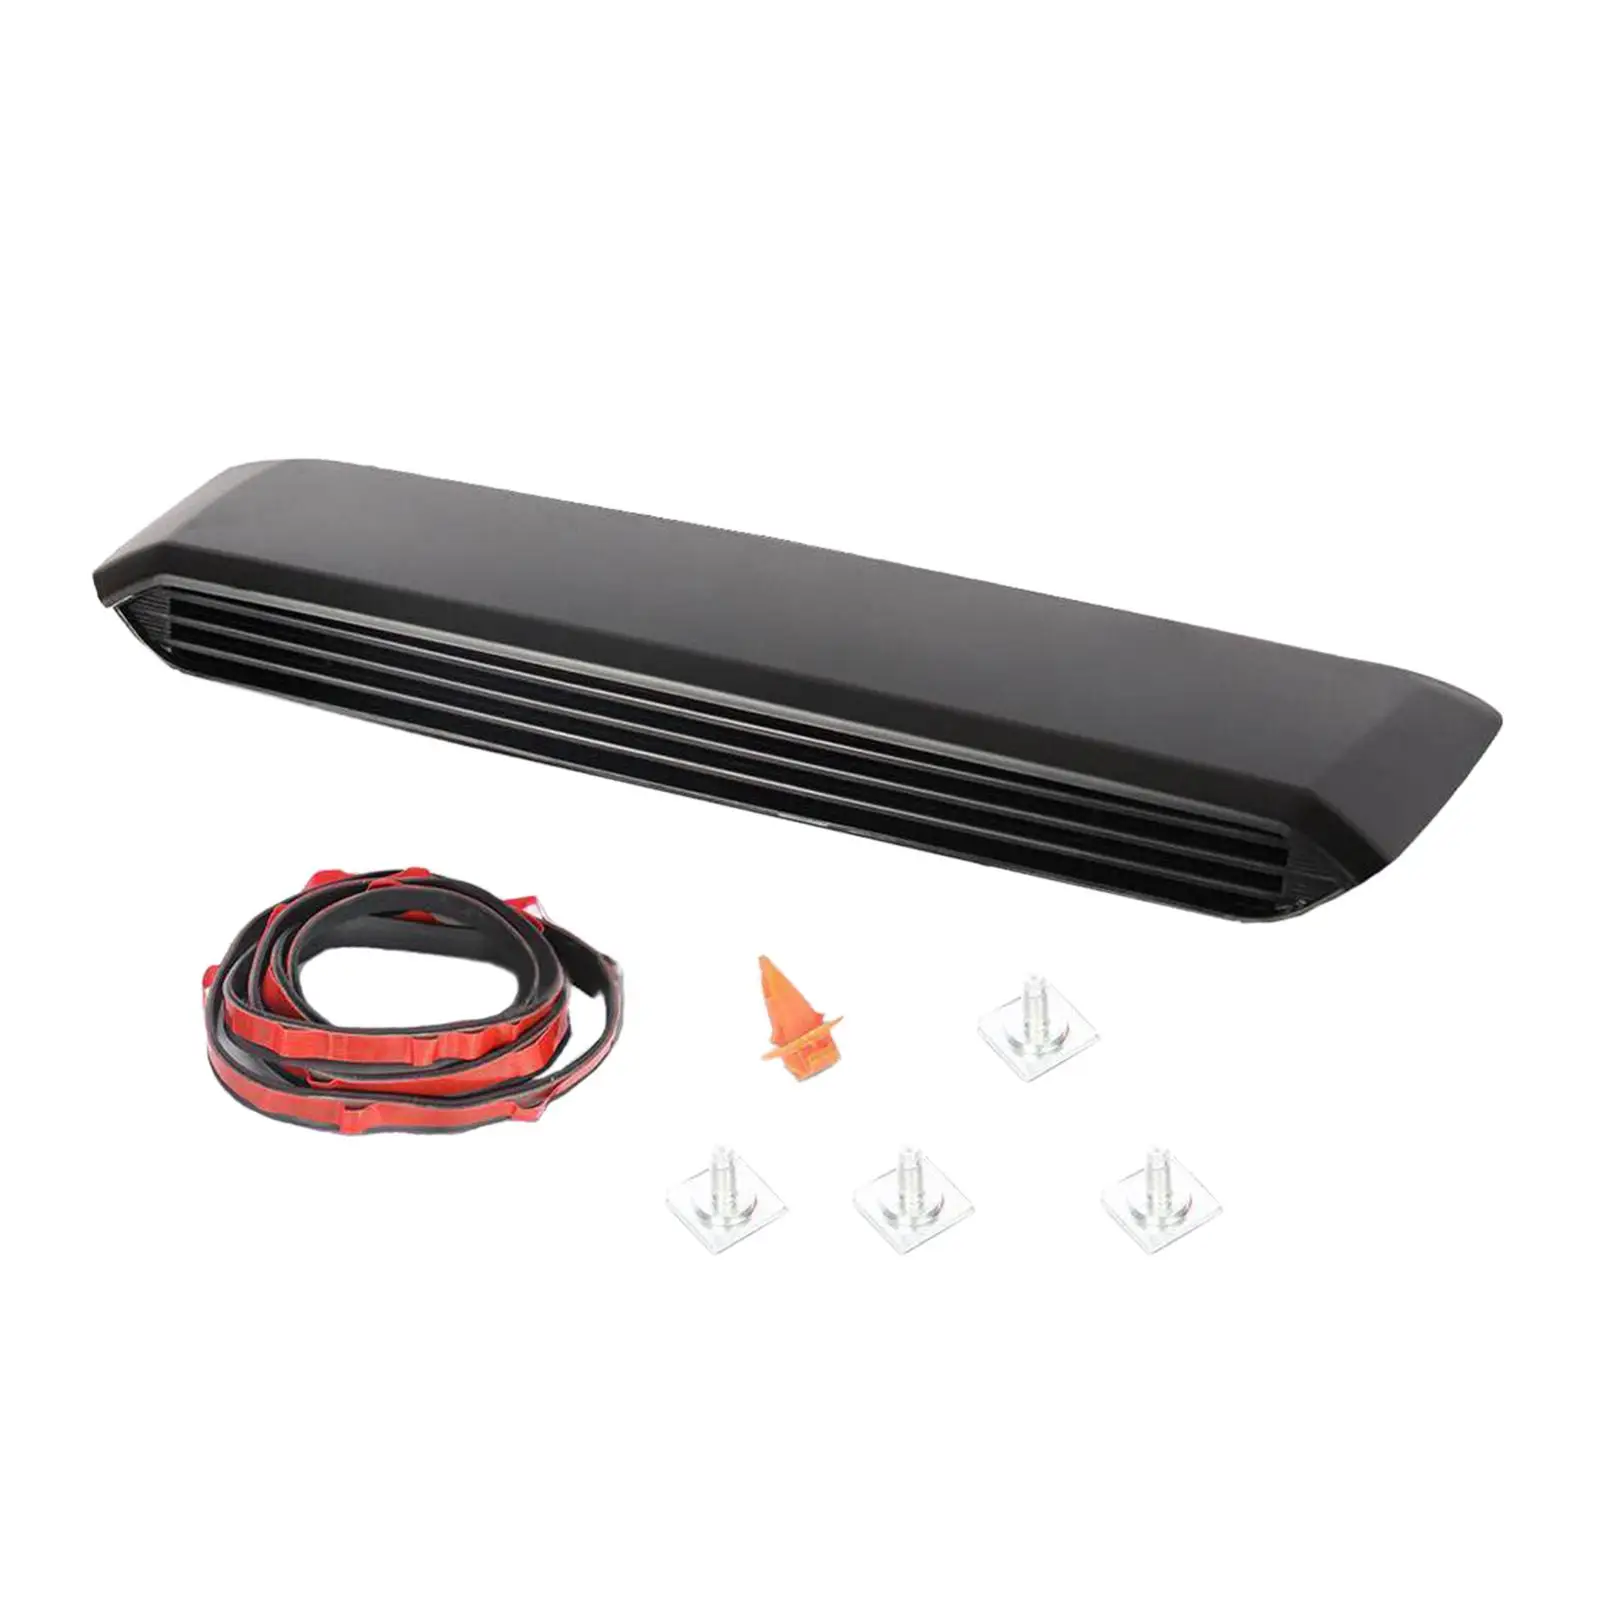 Hood Scoop Kit, Easy to Install 76181-04900 for Toyota for tacoma 2016-2022